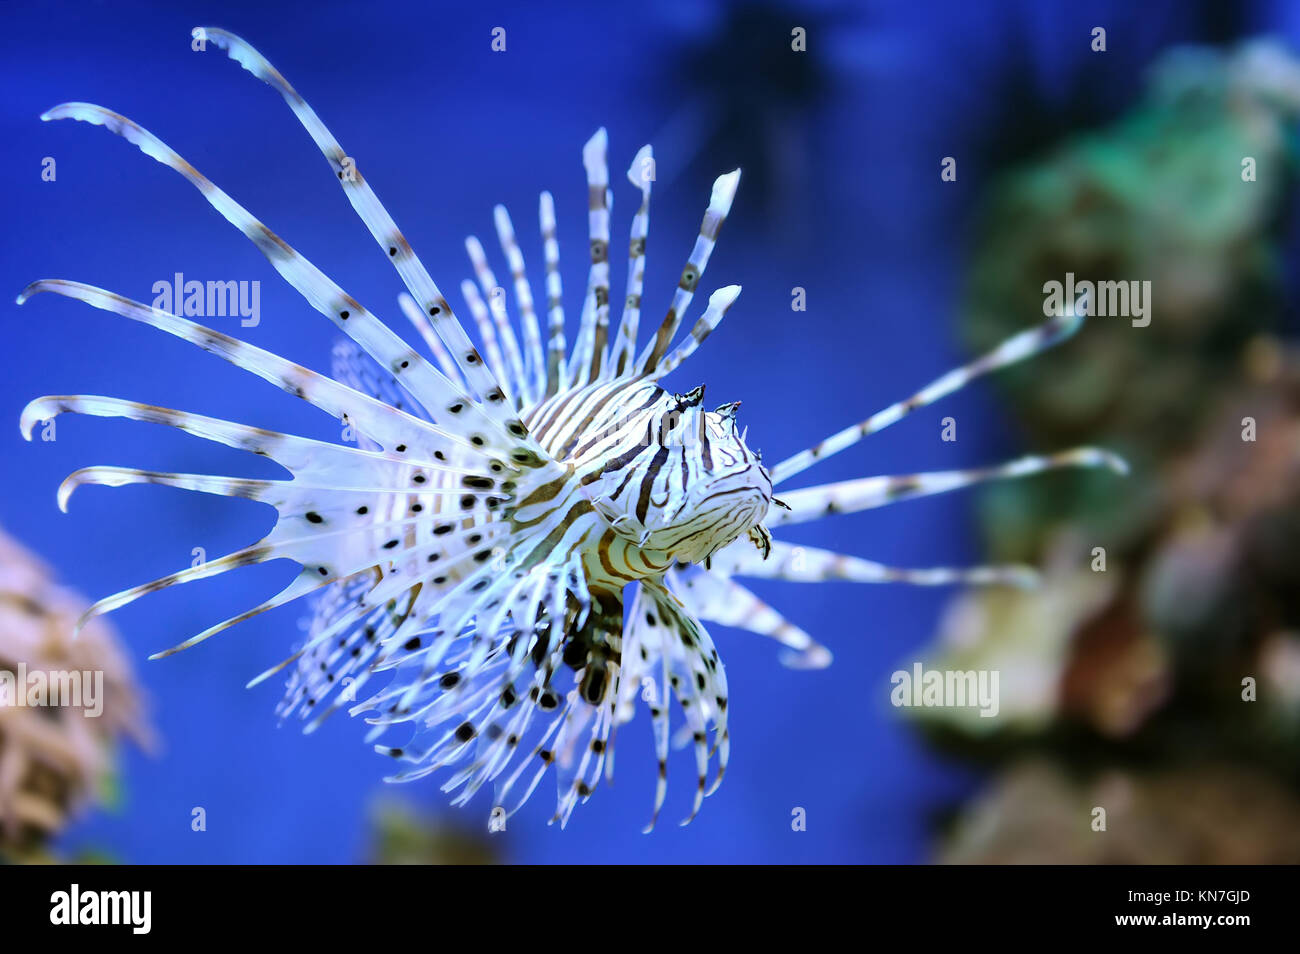 Common Lionfish (Pterois volitans) swimming above coral reefs Stock Photo